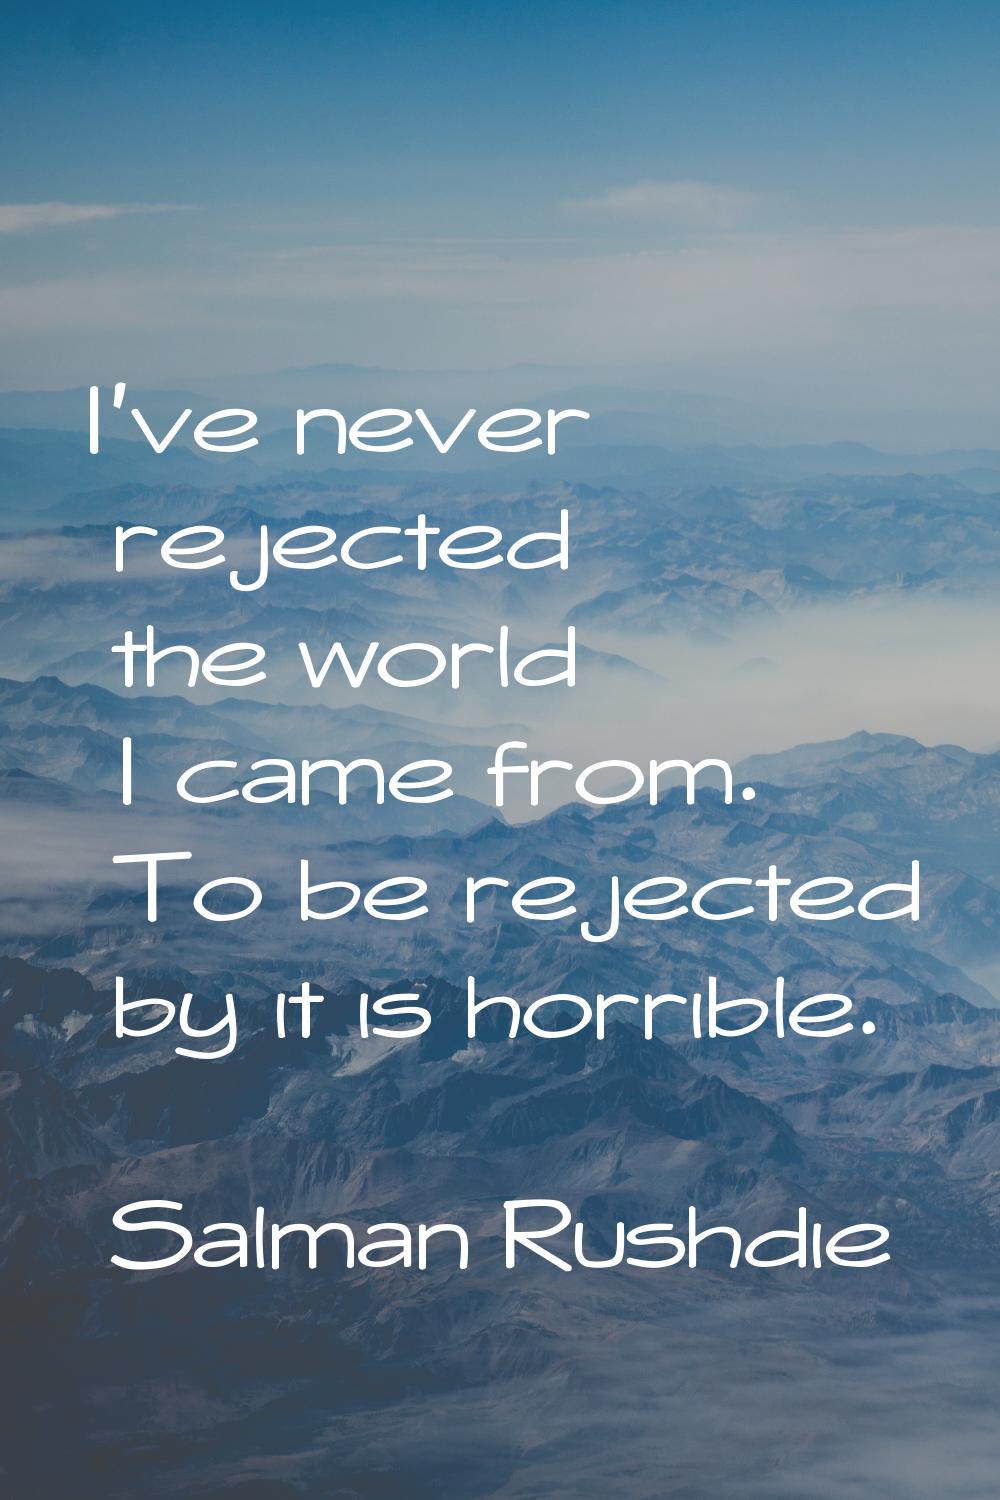 I've never rejected the world I came from. To be rejected by it is horrible.